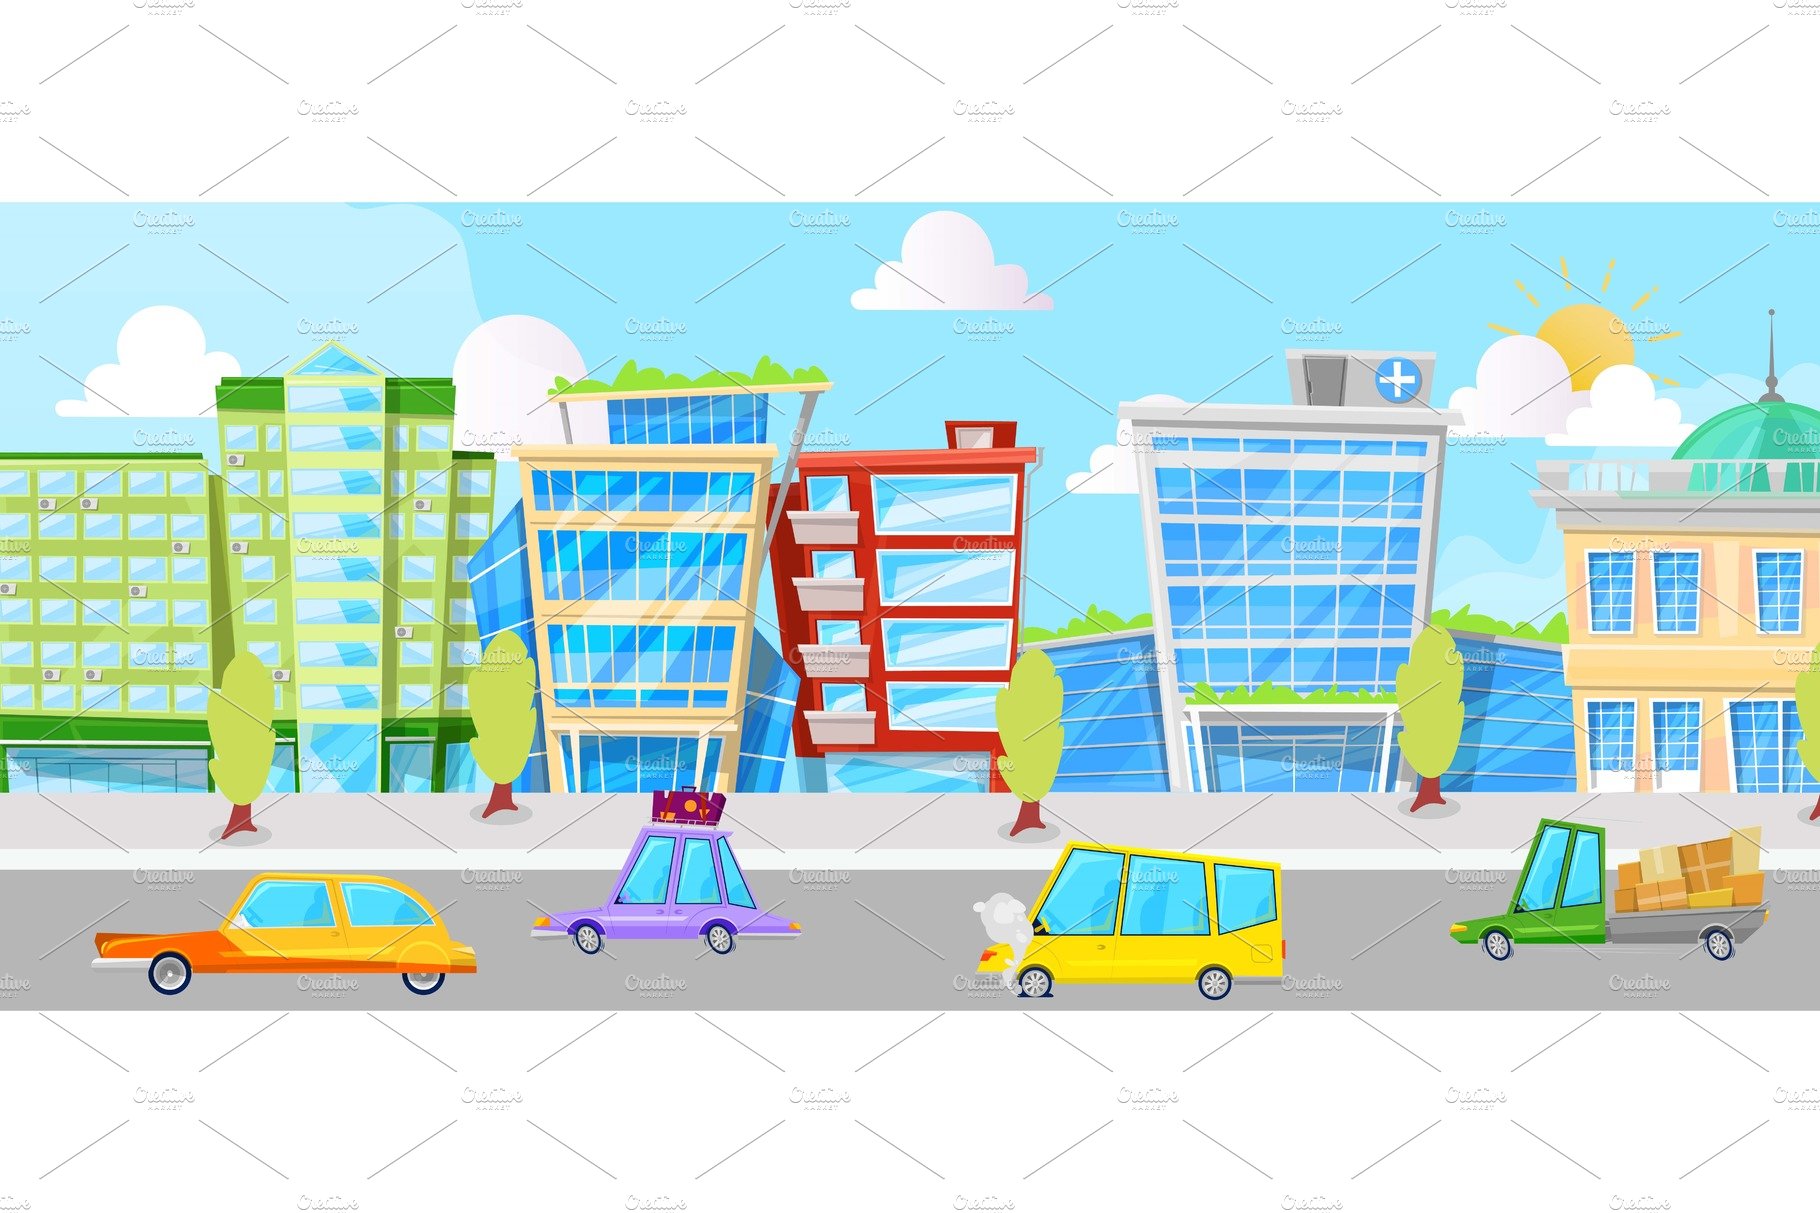 City street with cartoon cars cover image.